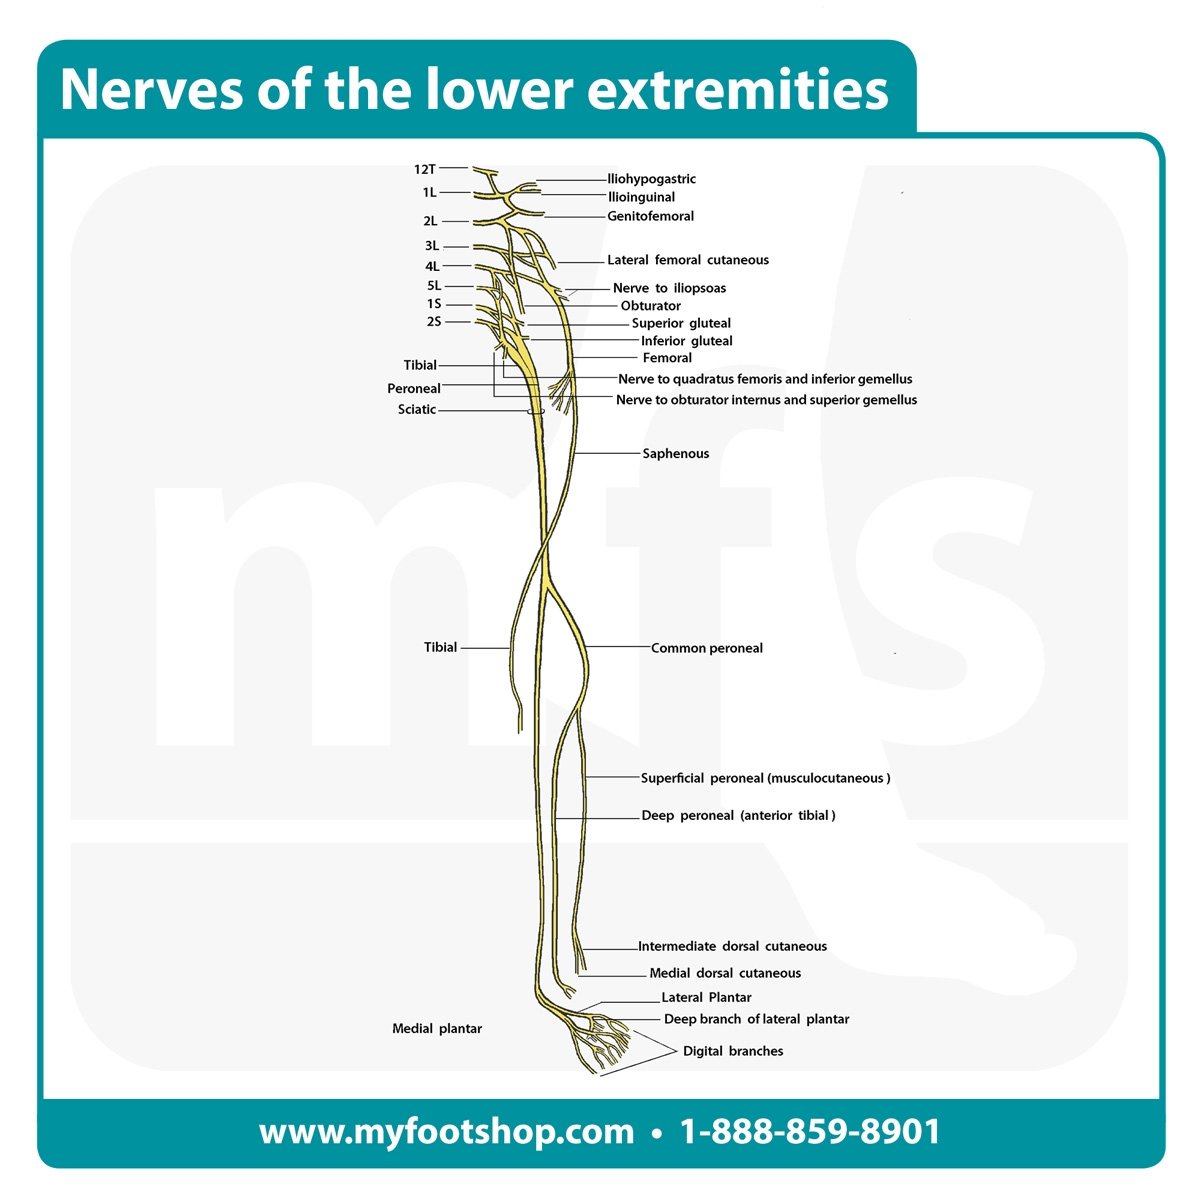 Nerves of the lower extremity | Lower extremity anatomy | MyFootShop.com